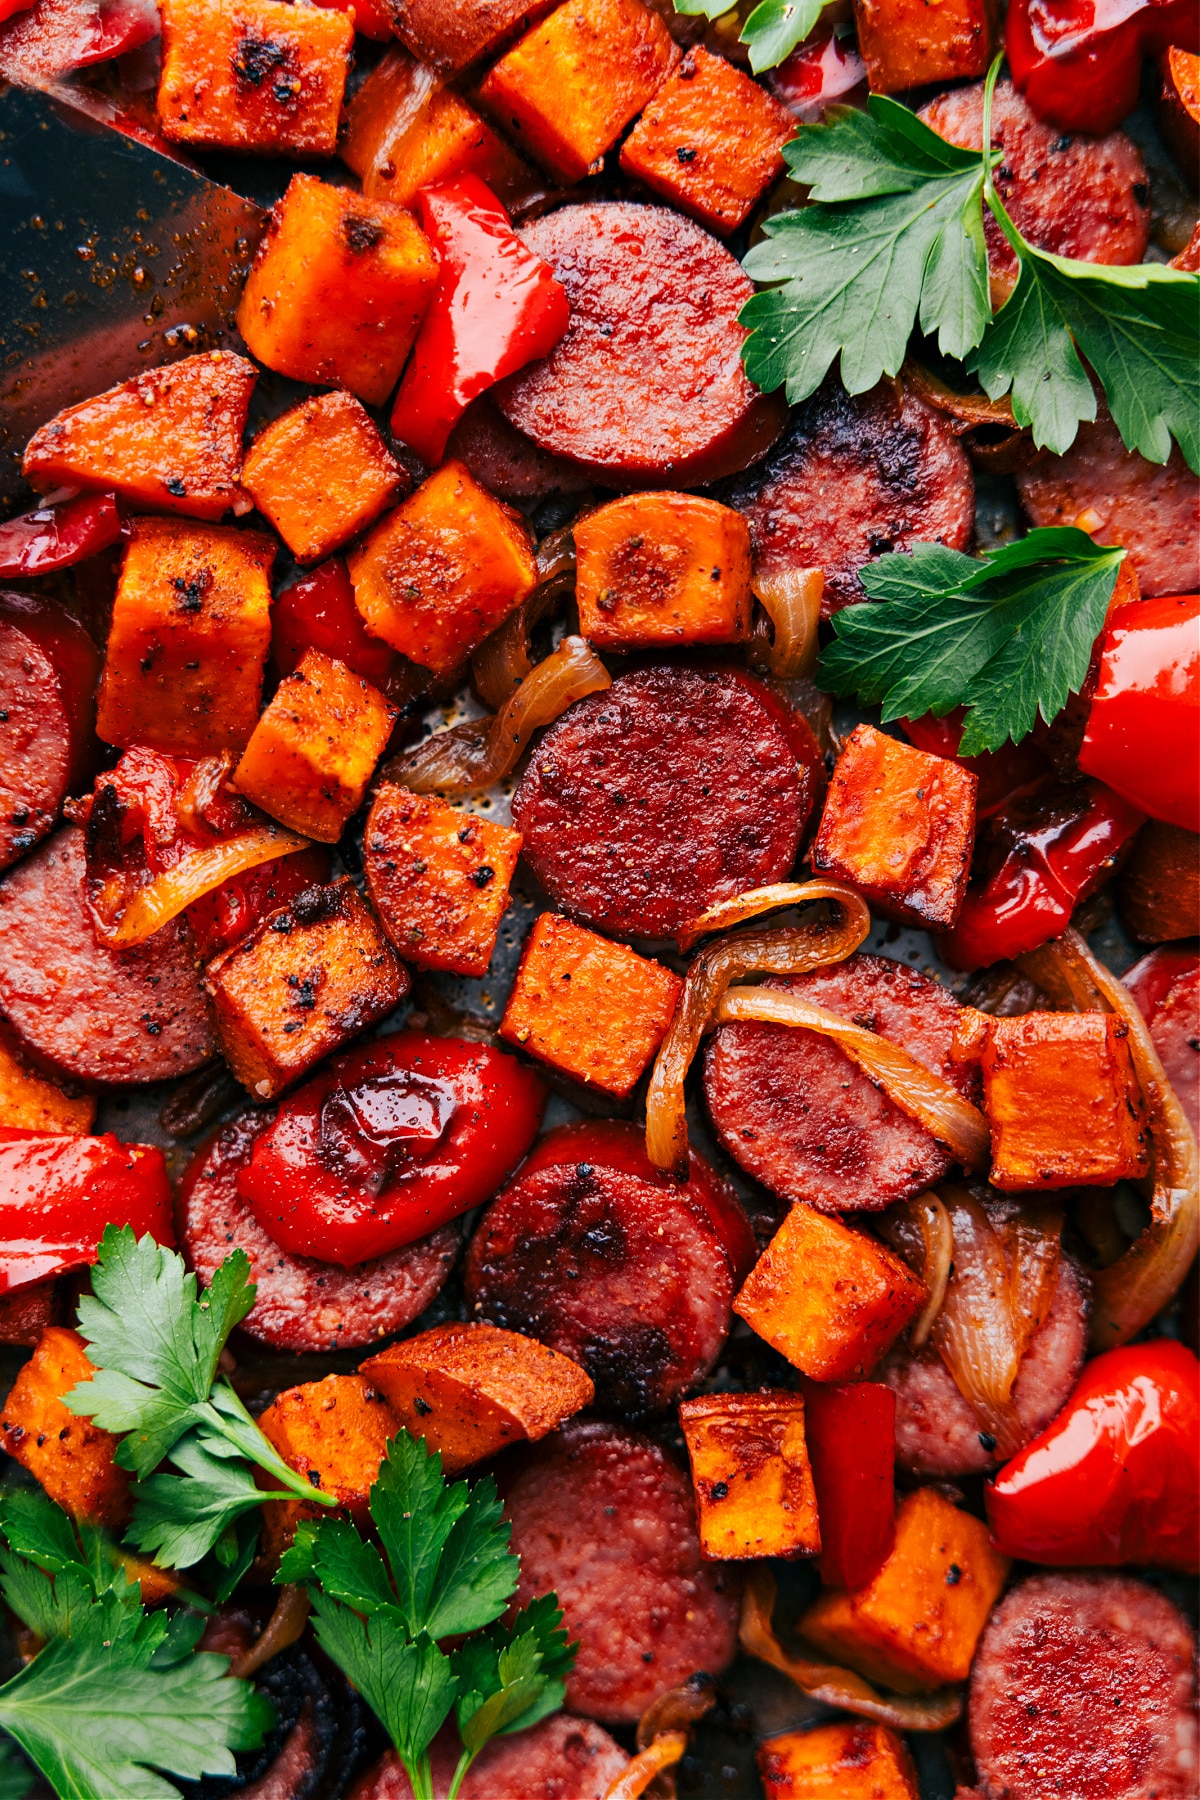 Sweet Potato and Sausage all on one pan fresh out of the oven.